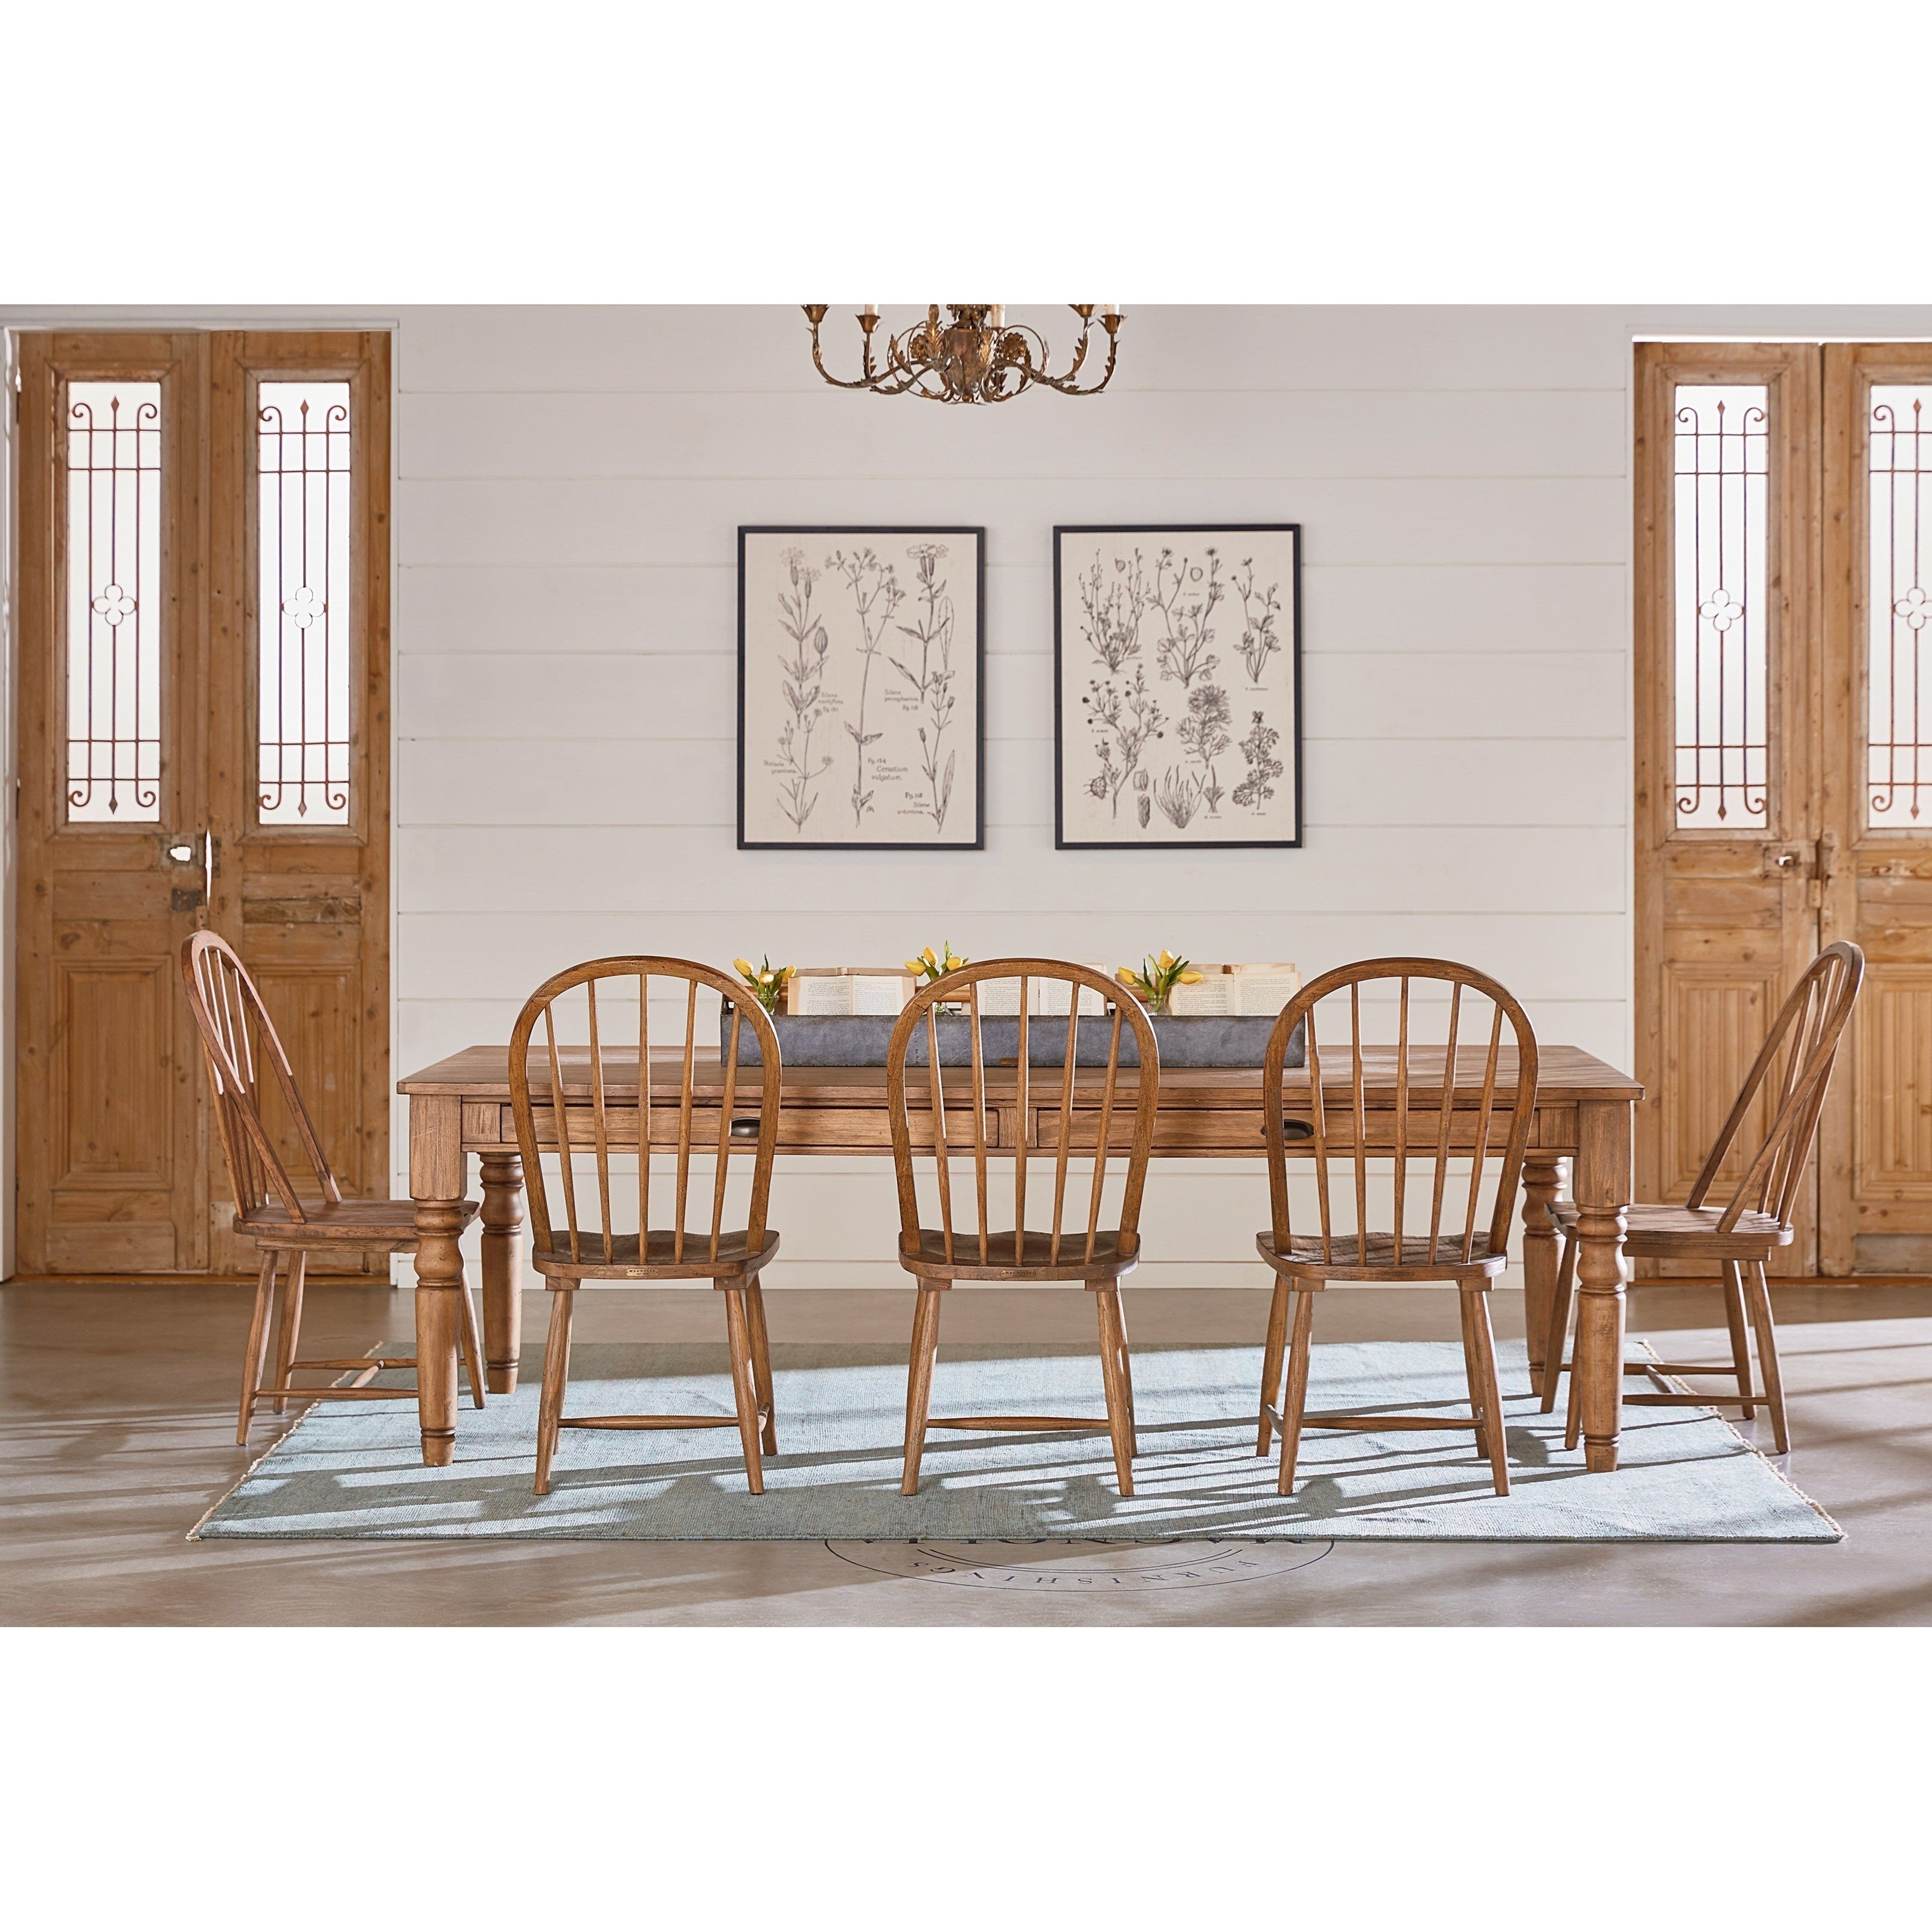 Widely Used Windsor Hoop Chairmagnolia Homejoanna Gaines (Photo 12 of 20)